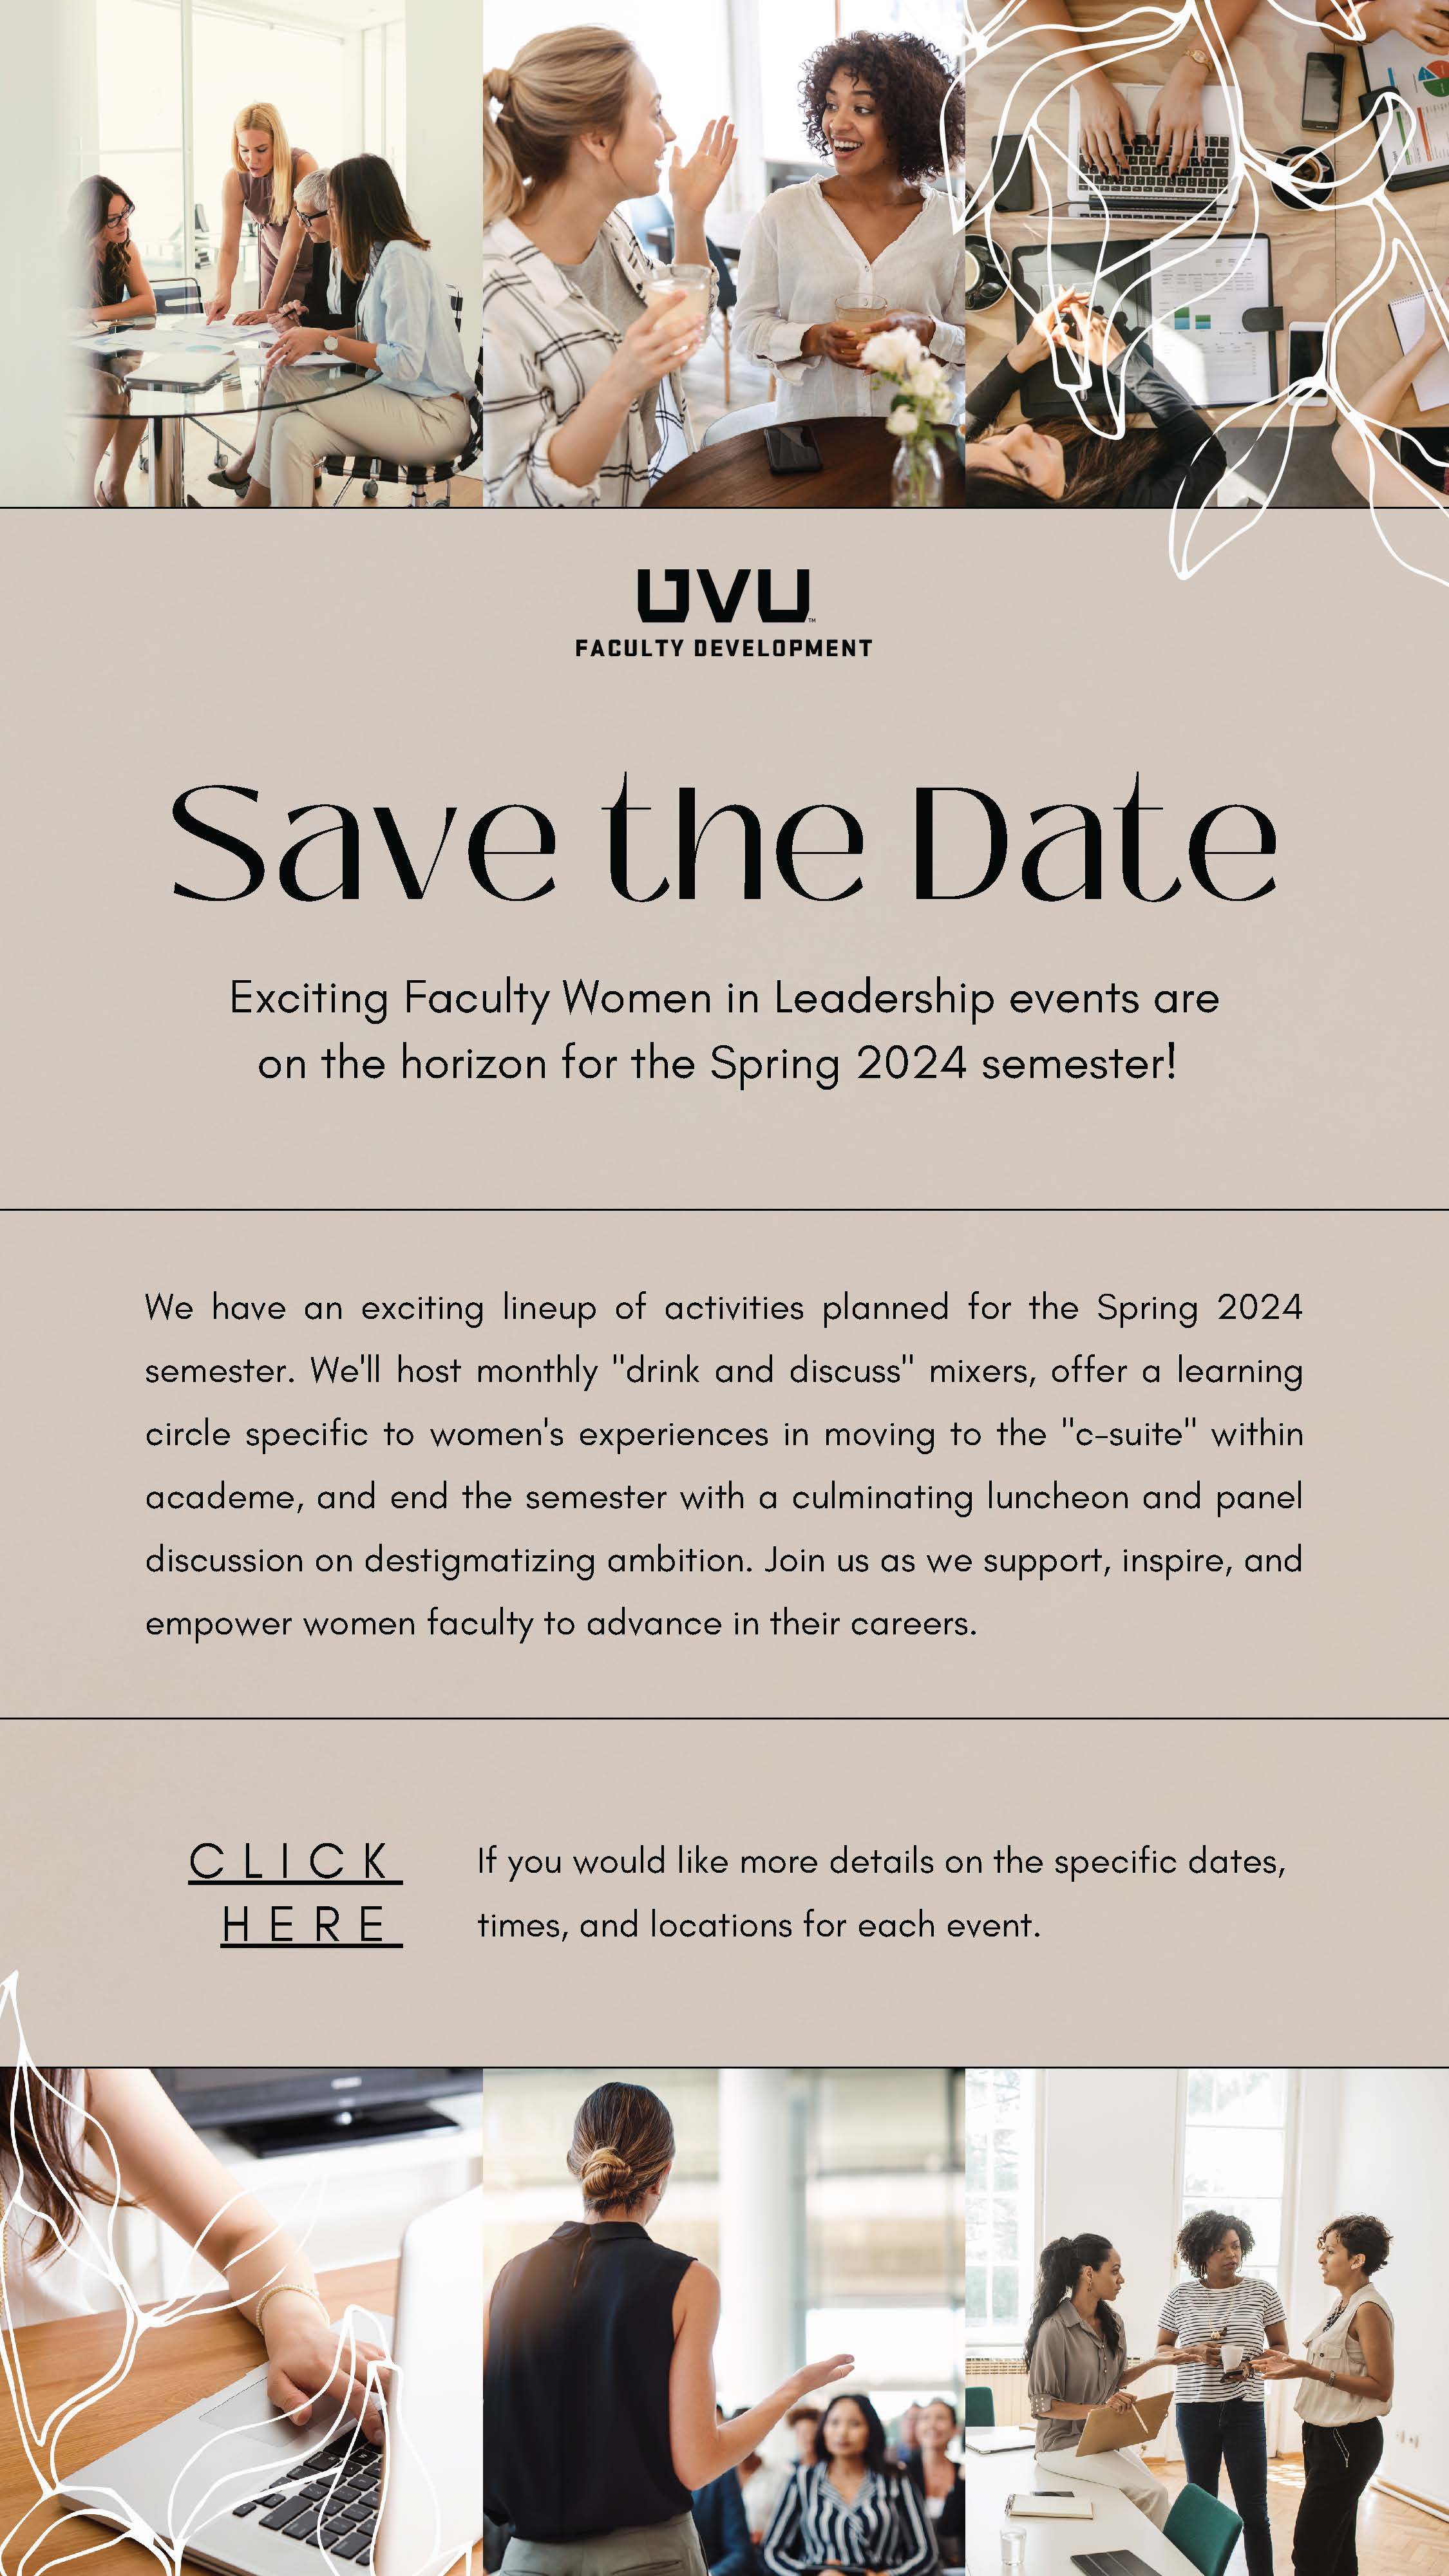 Save the Date Exciting Faculty Women in Leadership events are on the horizon for the Spring 2024 semester!     We have an exciting lineup of activities planned for the Spring 2024 semester. We'll host monthly "drink and discuss" mixers, offer a learning circle specific to women's experiences in moving to the "c-suite" within academe, and end the semester with a culminating luncheon and panel discussion on destigmatizing ambition. Join us as we support, inspire, and empower women faculty to advance in their careers.